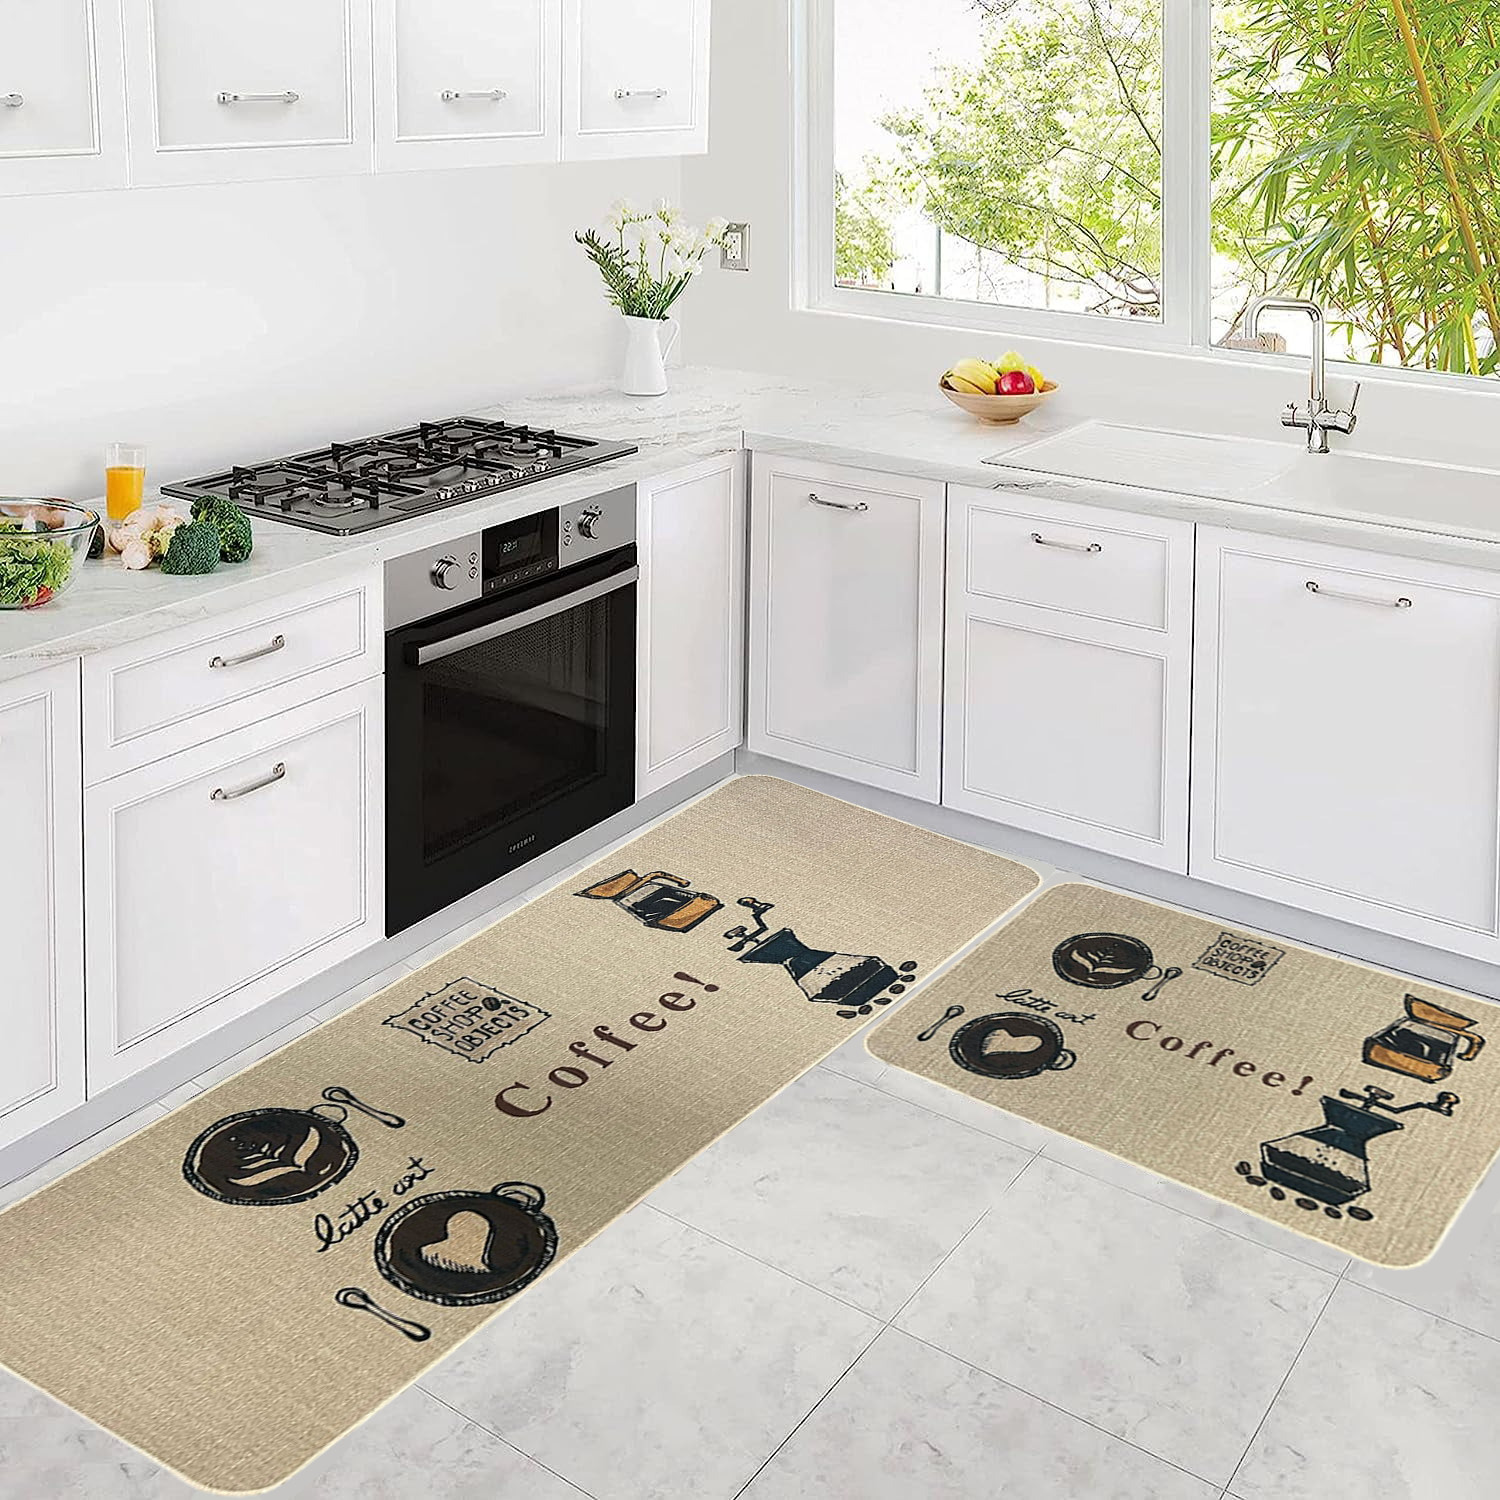 Kitchen+Rug+Set%2C+2+Pieces+Kitchenware+Style+Non+Slip+Kitchen+Mat%2C+Easy+to+Clean+Comfort+Standing+Mats+for+Kitchen%2C+Home%2C+Office%2CLaundry